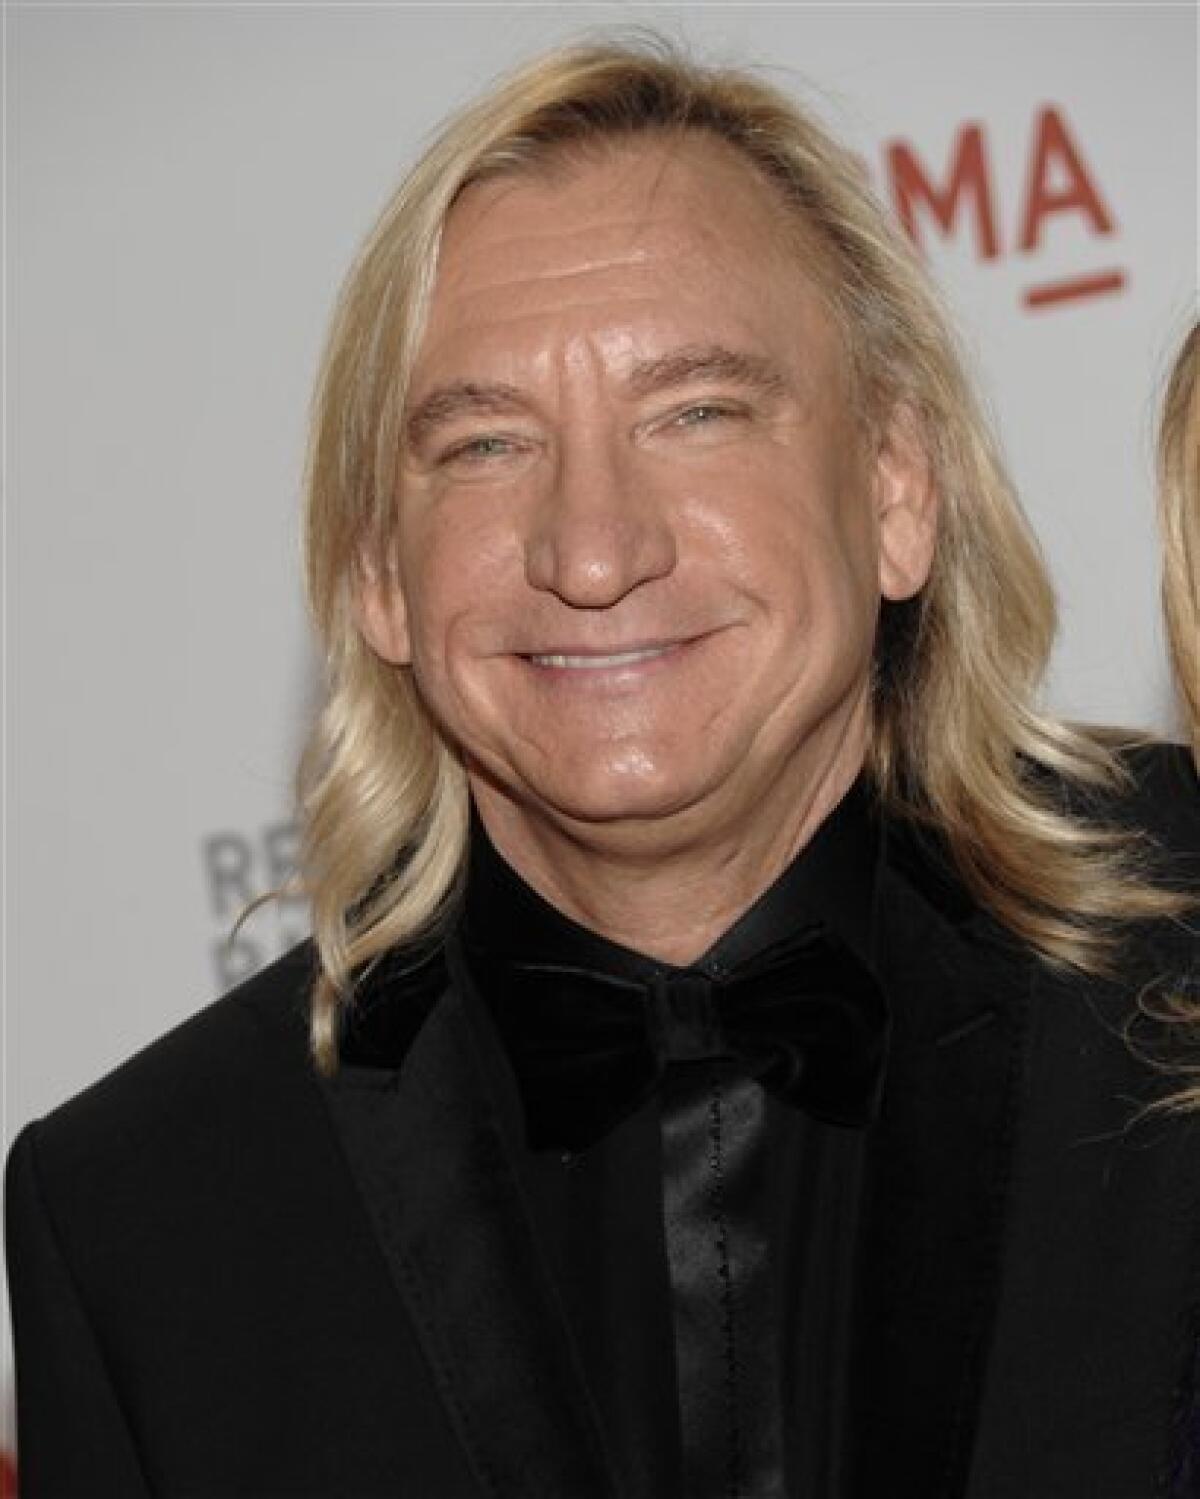 Rock and Roll Hall of Famer Joe Walsh, a former Encinitas resident, returns to San Diego for a sold-out Feb. 2 show at the Belly Up. "Analog Man," his first new album in two decades, is due out later this year. (AP Photo/Dan Steinberg) — AP